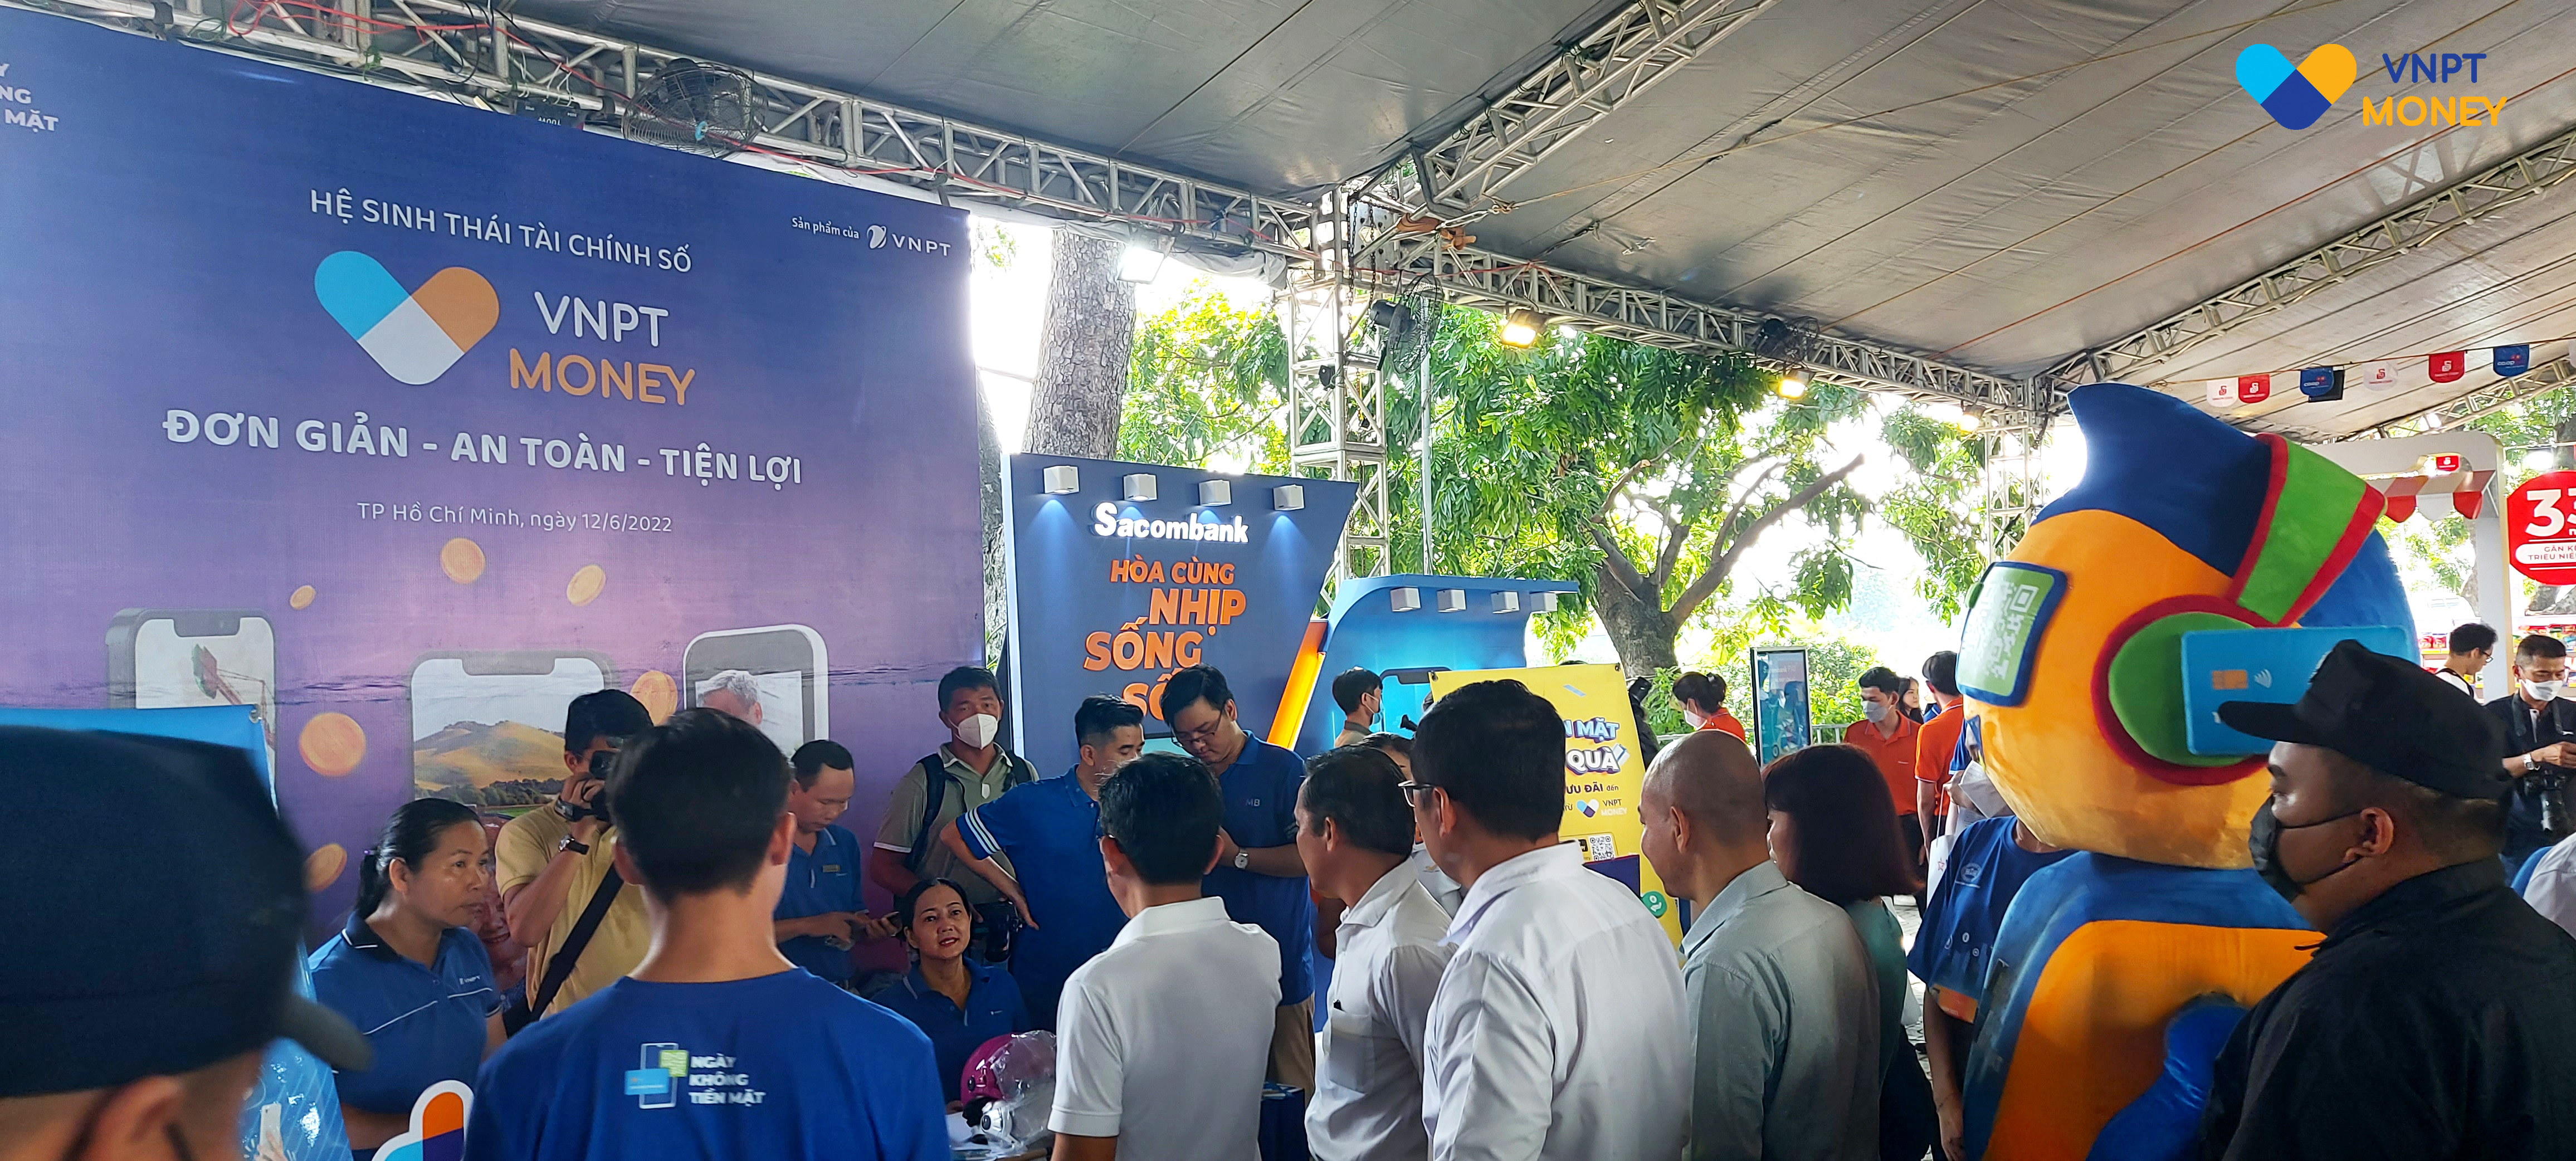 People visit the stall of VNPT at the Cashless Fair in Thu Duc City, Ho Chi Minh City, June 12, 2022. Photo: Quang Dinh / Tuoi Tre